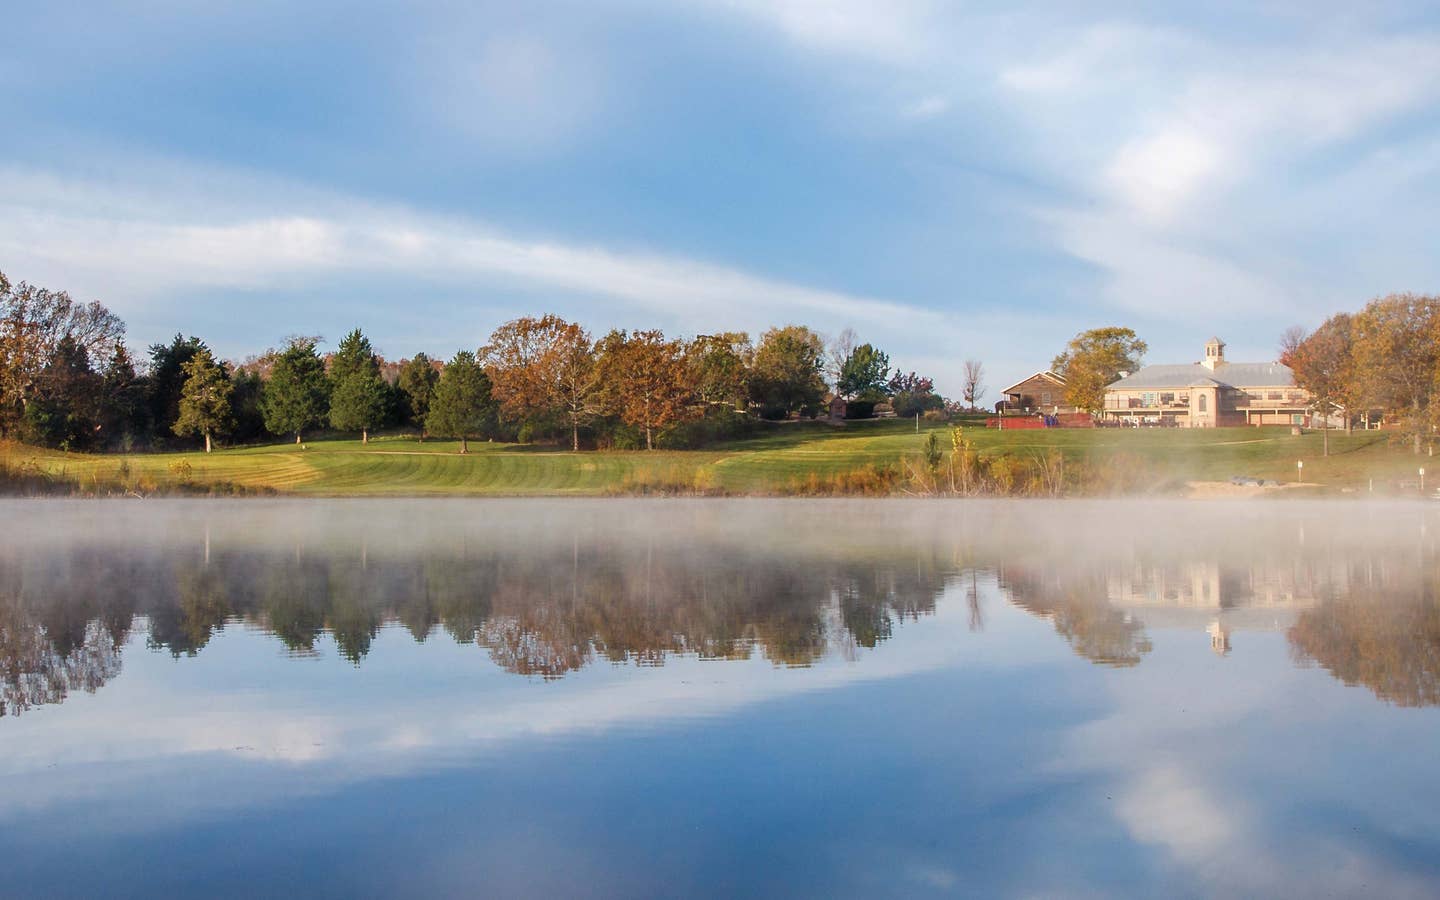 Lake with fog rolling on top and view of Timber Creek Resort property building and trees in De Soto, Missouri.